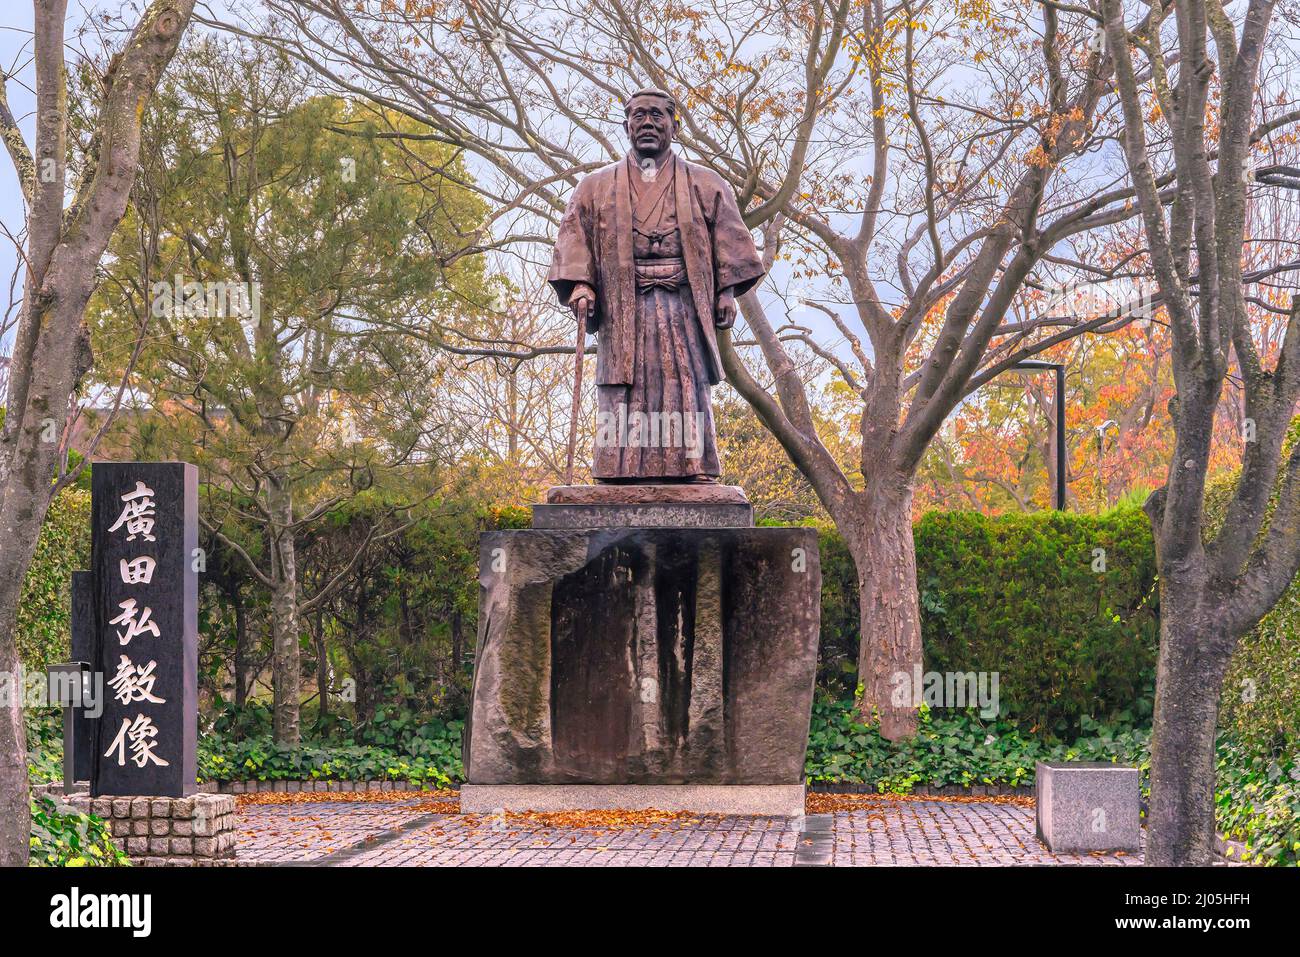 fukuoka, kyushu - april 09 2021: Statue erected by Idemitsu petroleum company in Ōhori park depicting ancient Japanese Prime Minister executed for war Stock Photo